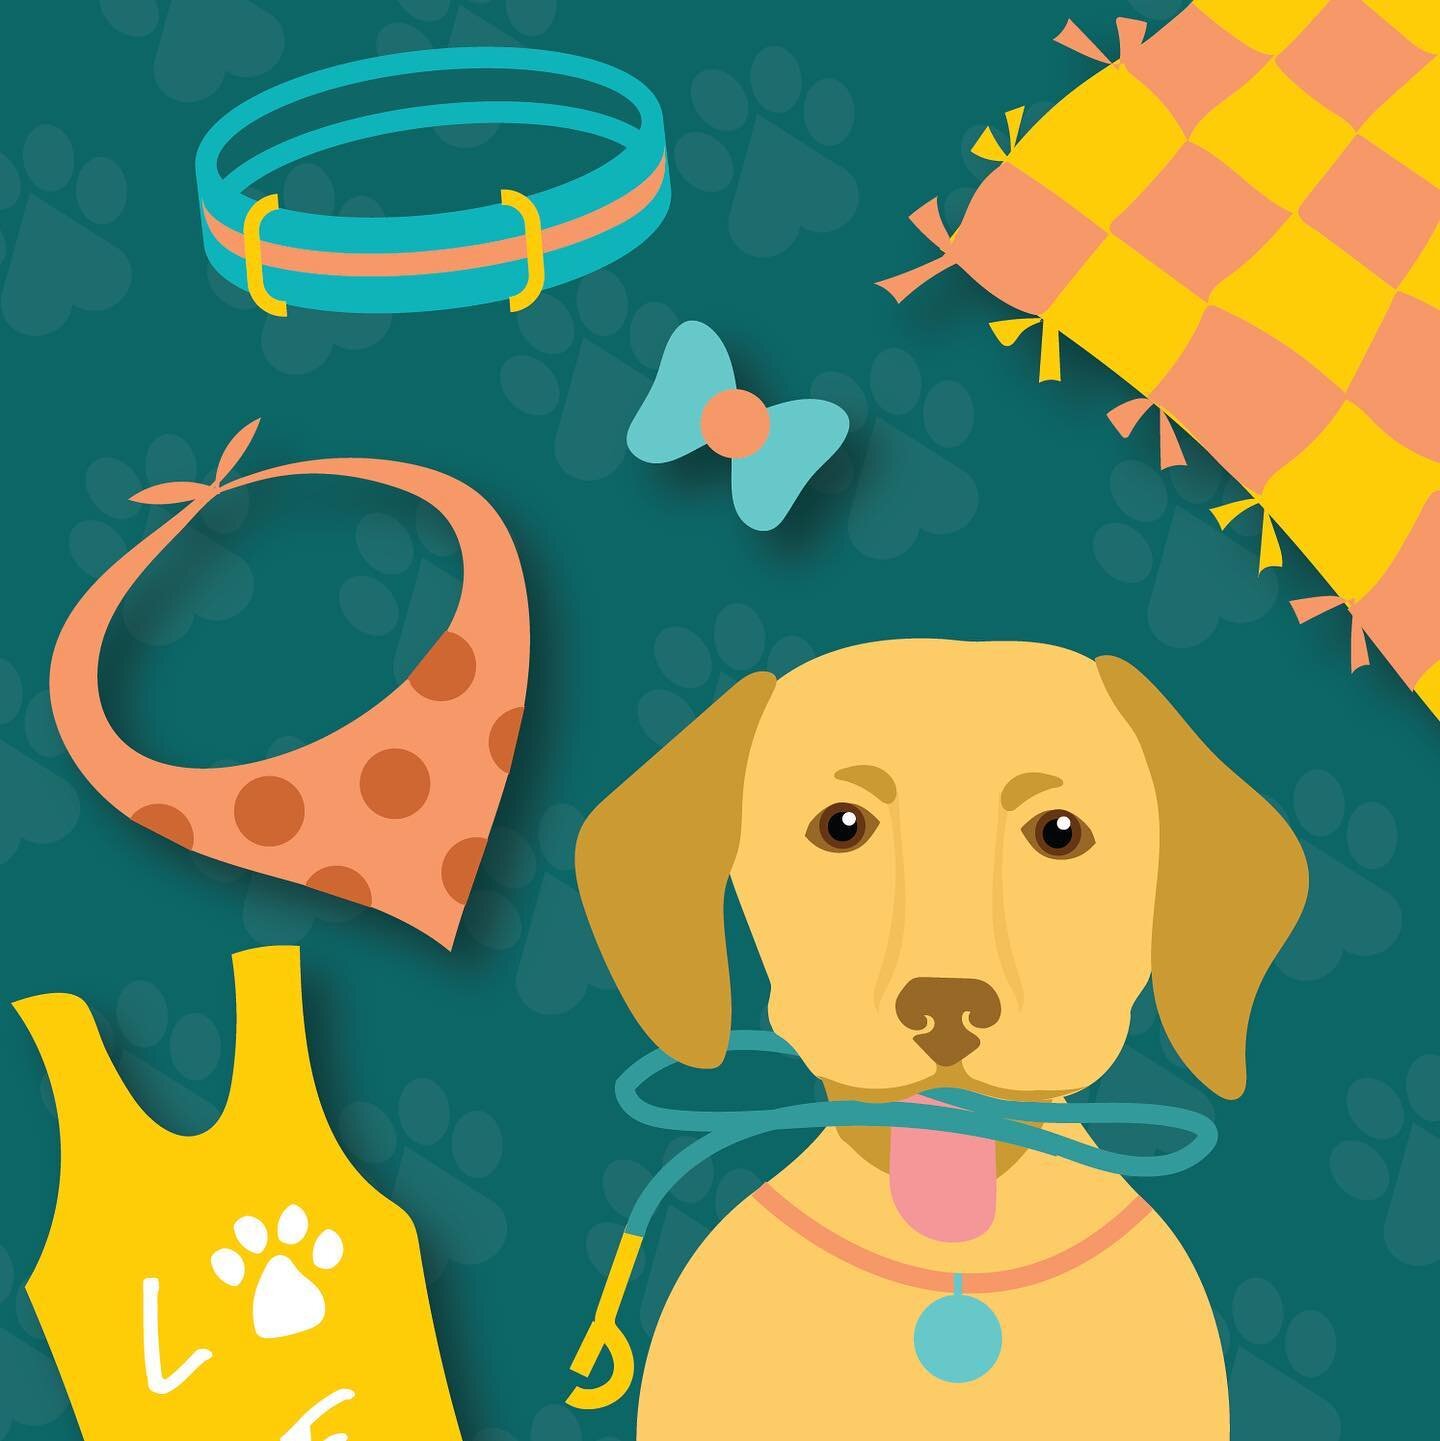 This weekend we have a fantastic variety of vendors selling leashes, bandanas, collars, bowties, apparel, tags, blankets, dog-training, art, face-painting, canine massage, treats, and more! Come say hi!👋🥰

@thebrowndog.shop 
@val_thesquirrelhunter 